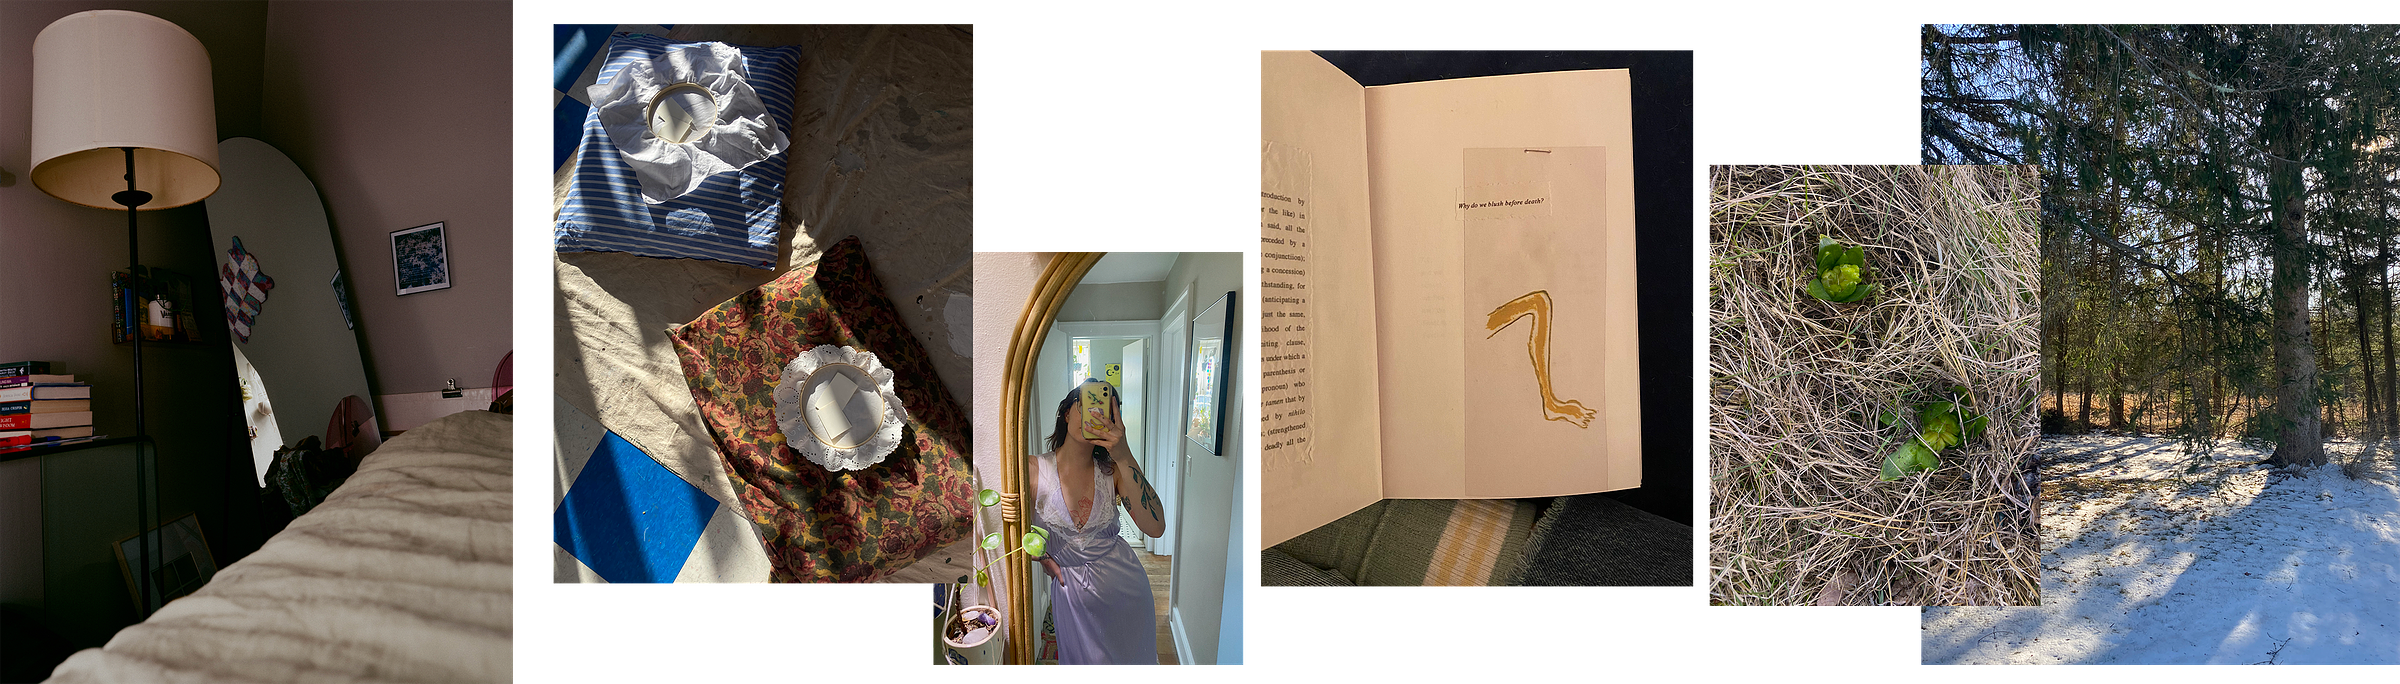 6 photographs in a line. from the left, the first one shows a full length mirror in the center with the foot of a bed peaking into frame. It is dark and a small part of the sunny window is showing in the mirror. The next photograph is an overhead at holding space with two embroidery hoops on top of pillows. 3rd is a selfie in the mirror wearing a lilac nightie. 4th is an overhead photo of a book open to a page that reads "why do we blush at dead" with a drawing of a leg. 5th and 6th photographs are from a cemetery, the first one an overhead shot of new green growth popping up amidst dead grass.